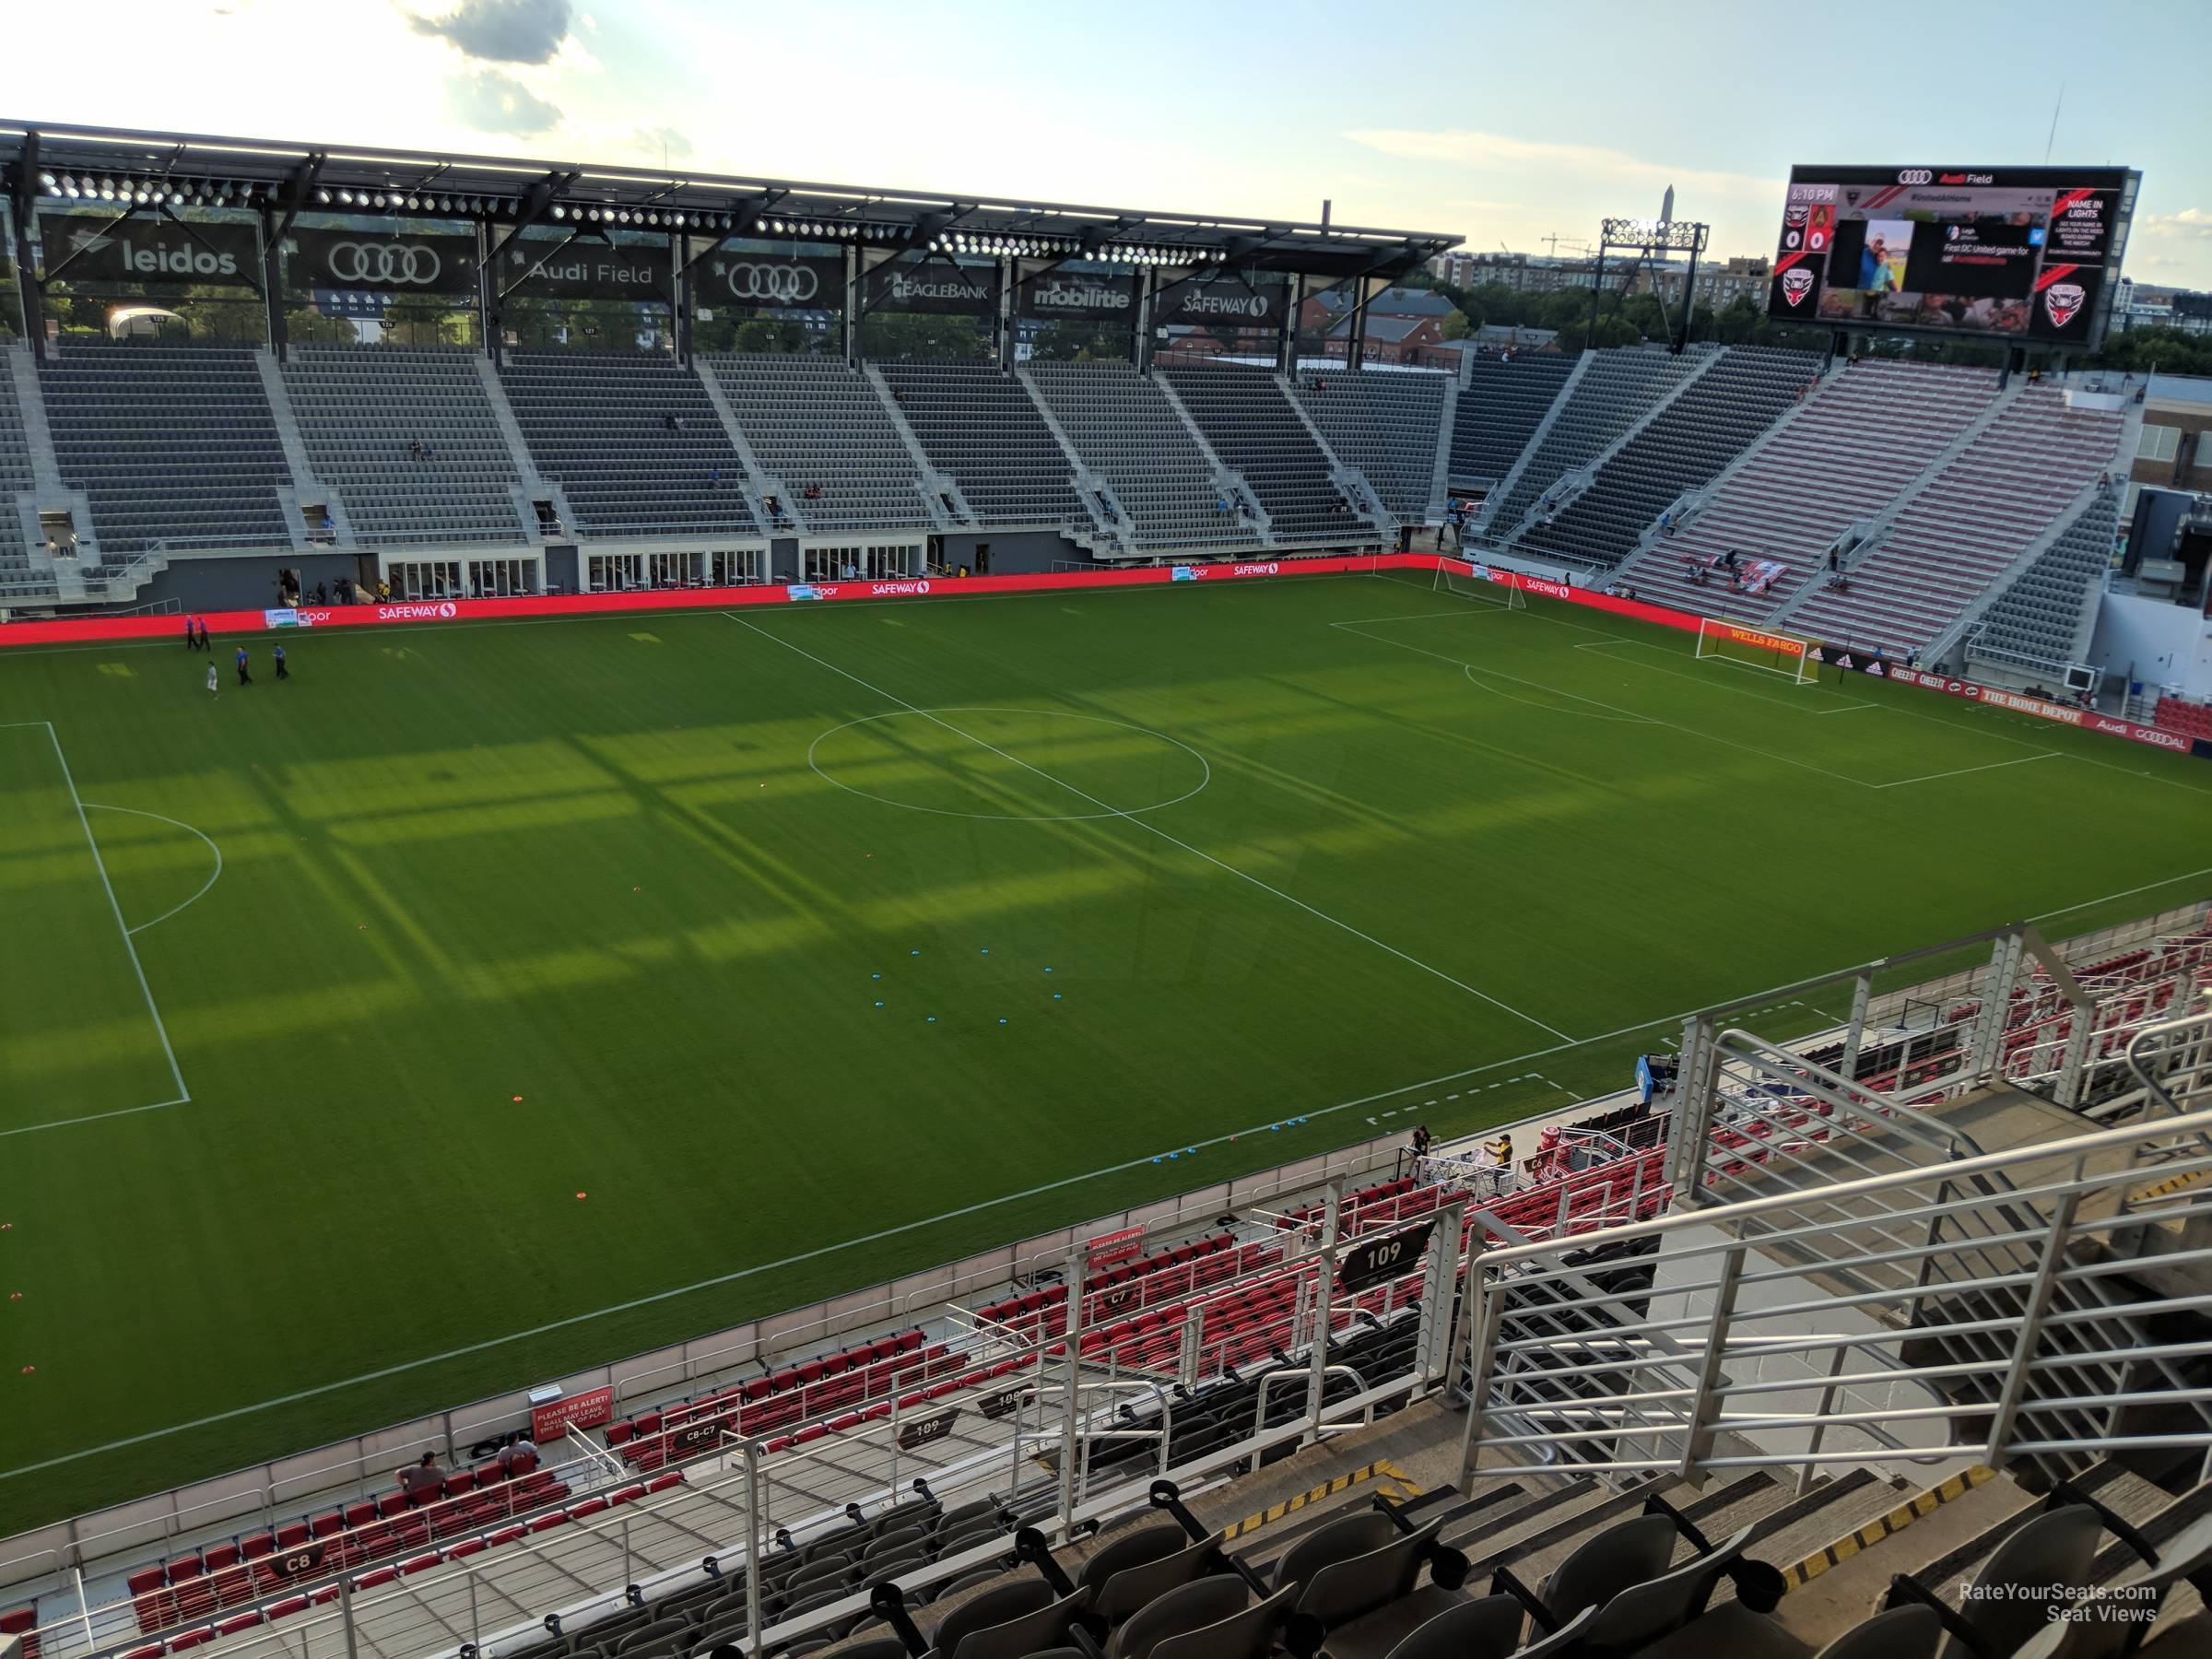 section 209, row 6 seat view  - audi field